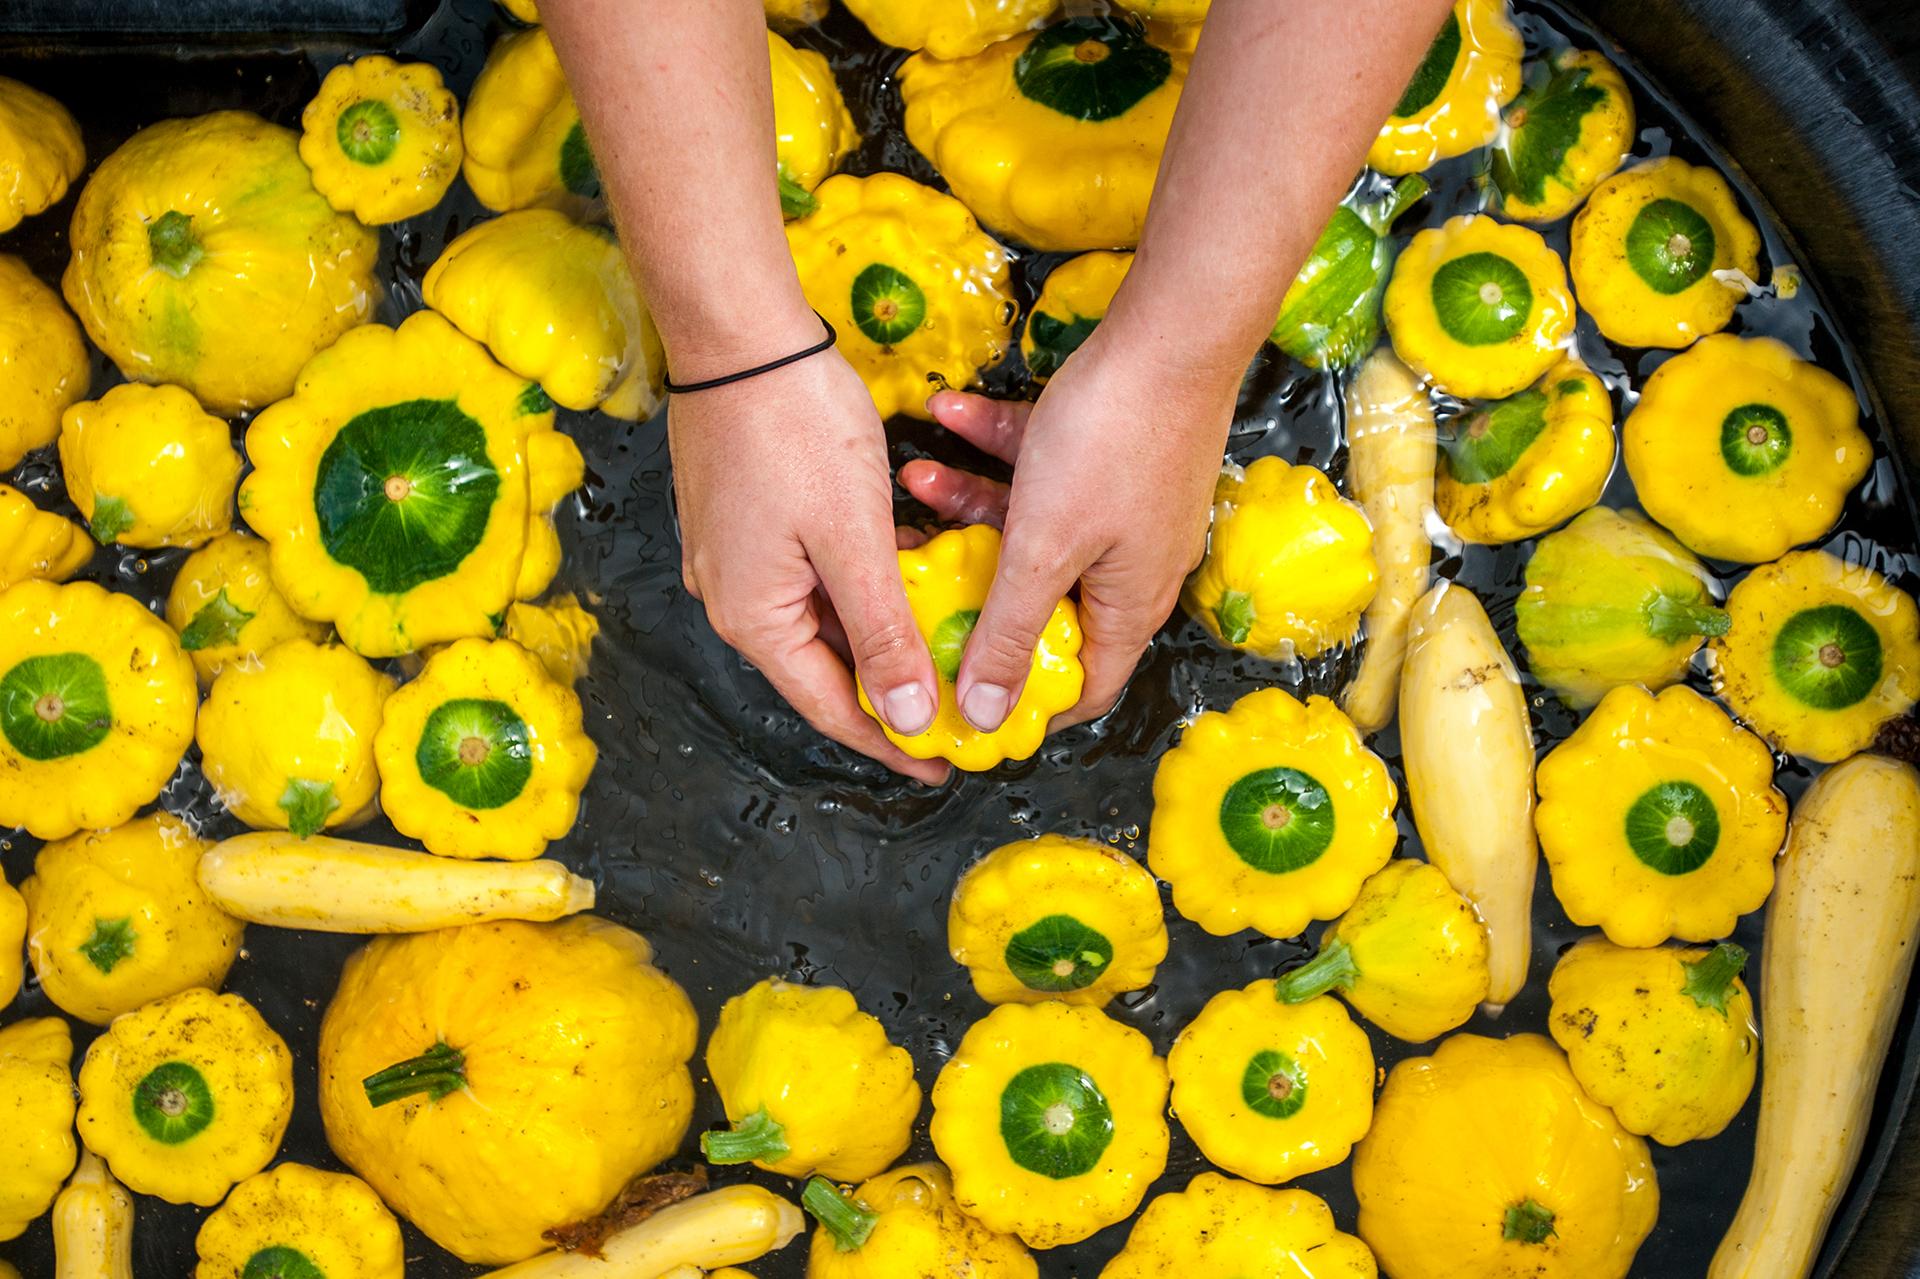 Hands washing yellow and green colored squash in water